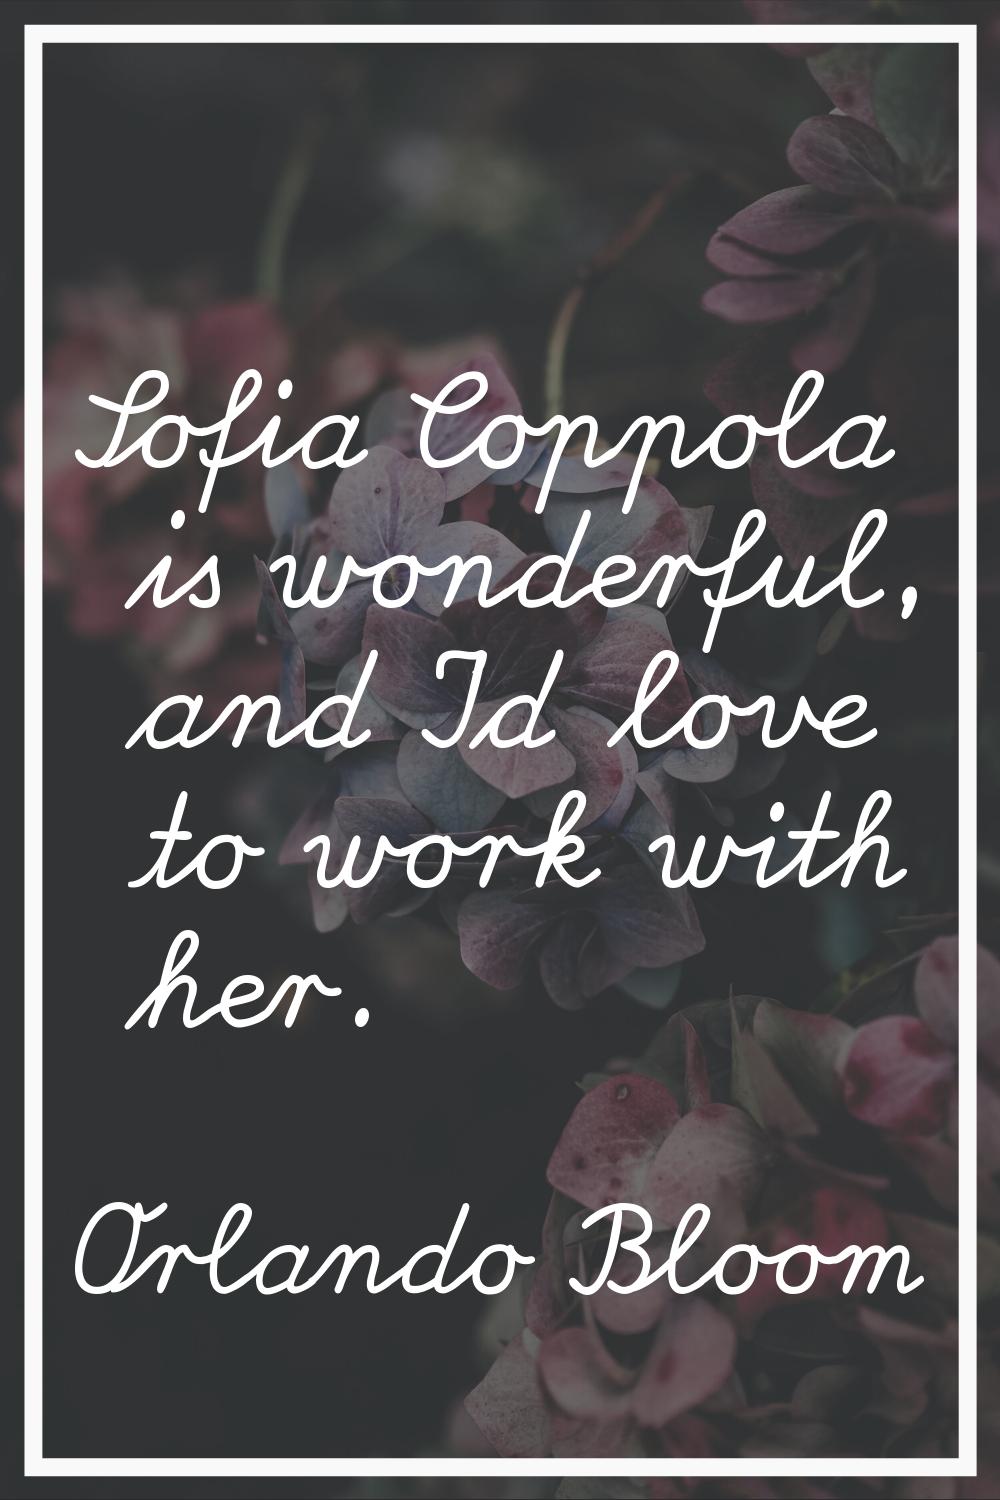 Sofia Coppola is wonderful, and I'd love to work with her.